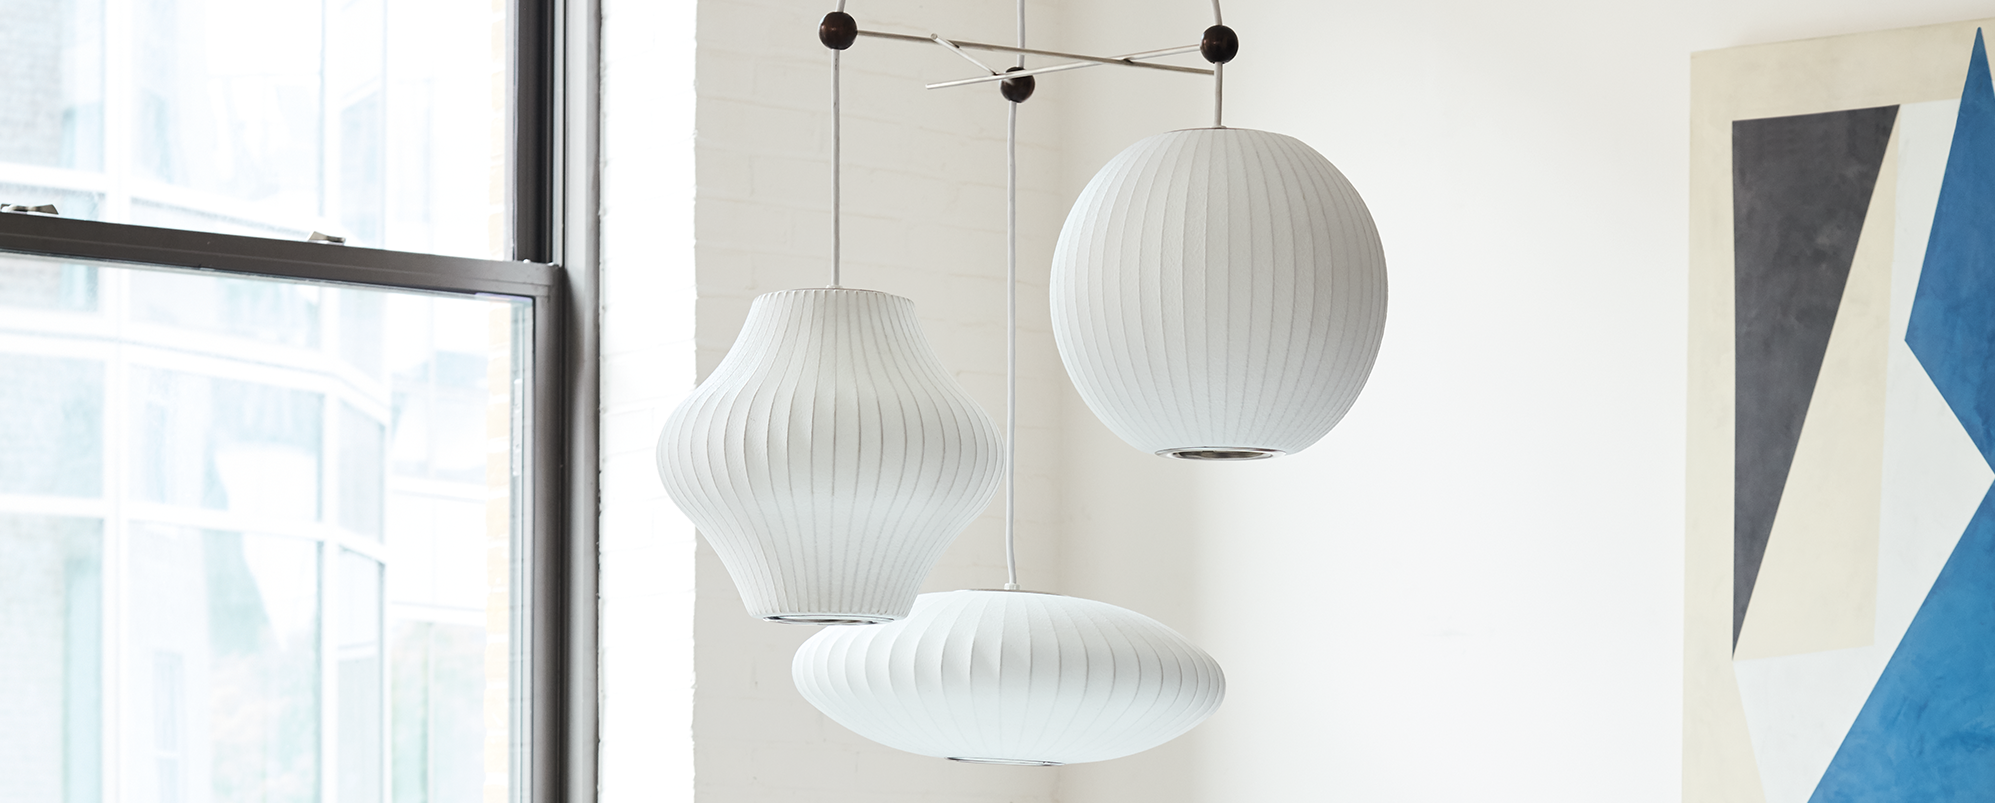 Multiple Bubble lamps in a home environment